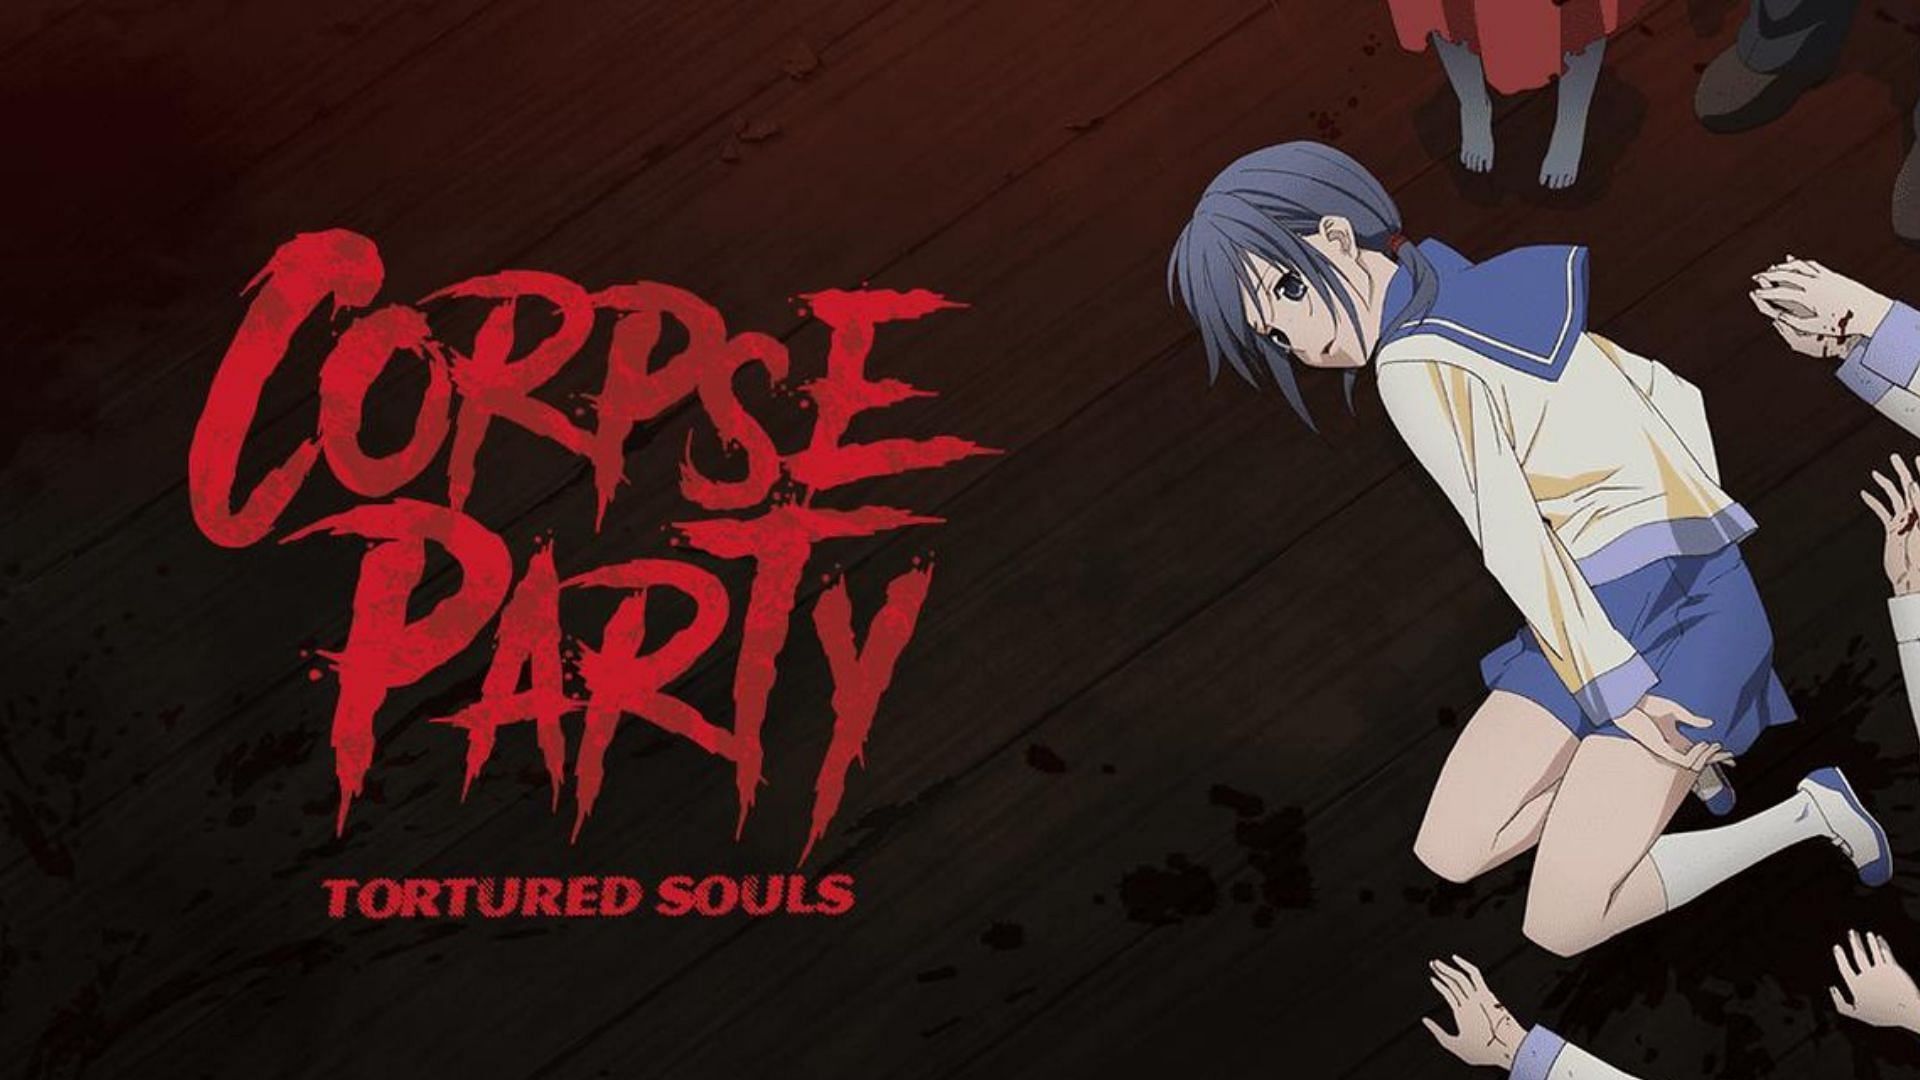 Corpse Party 1080P, 2K, 4K, 5K HD wallpapers free download | Wallpaper Flare